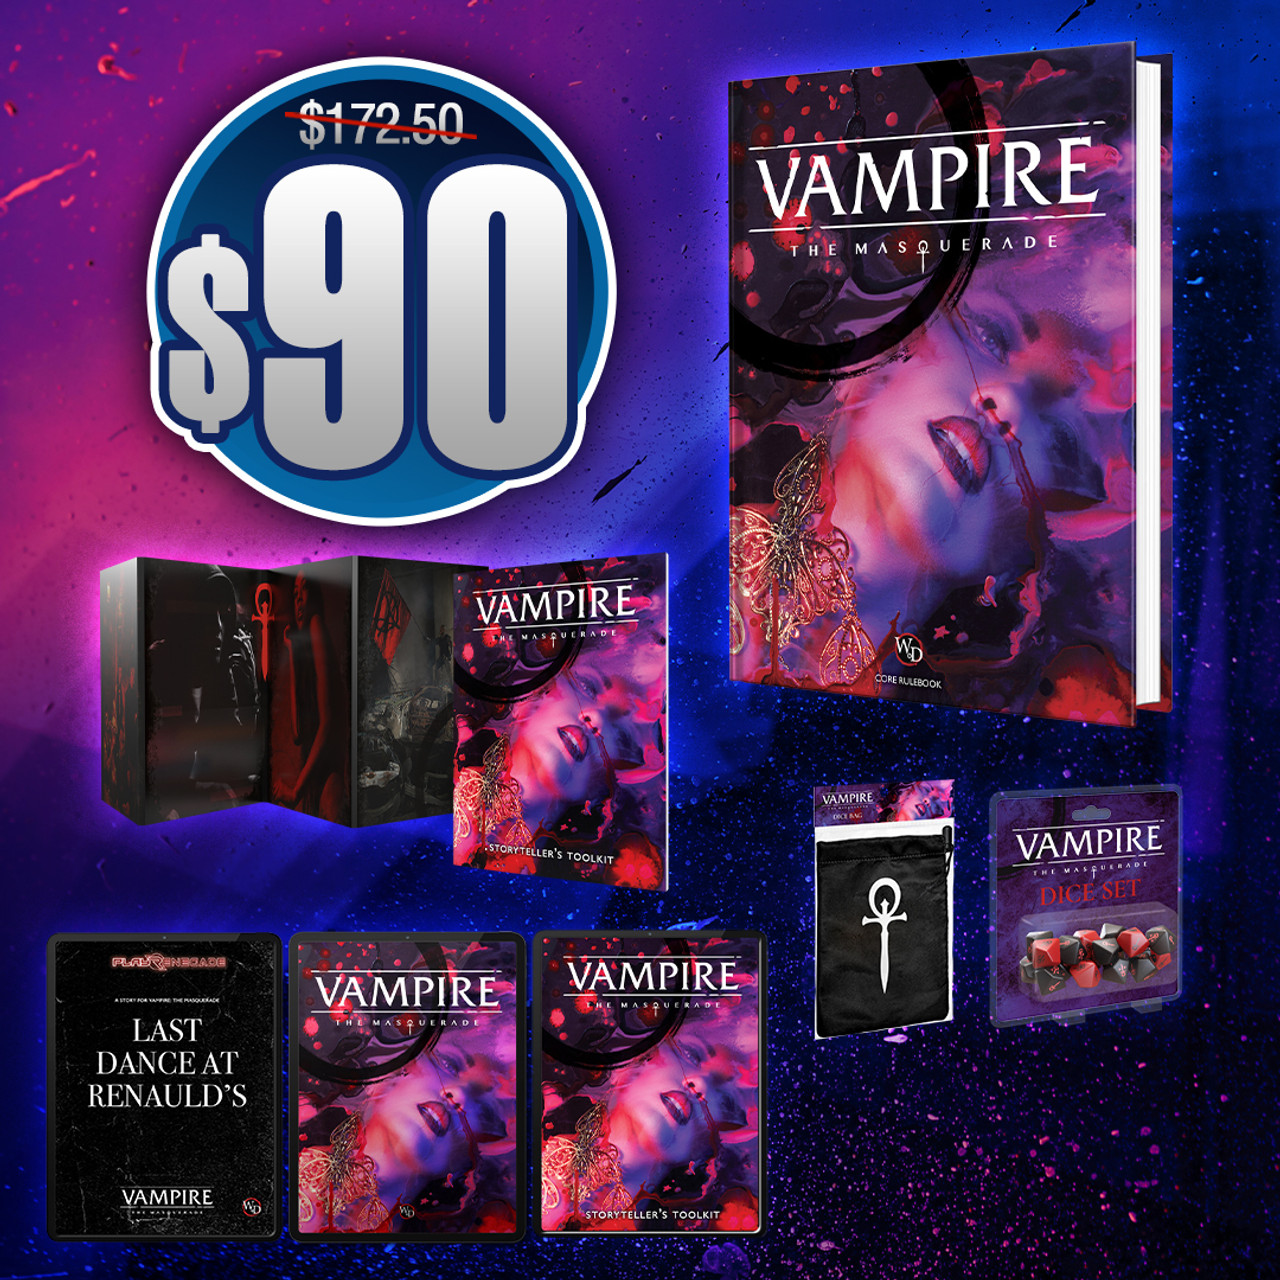 Vampire: The Masquerade 5th Edition Roleplaying Game Expanded